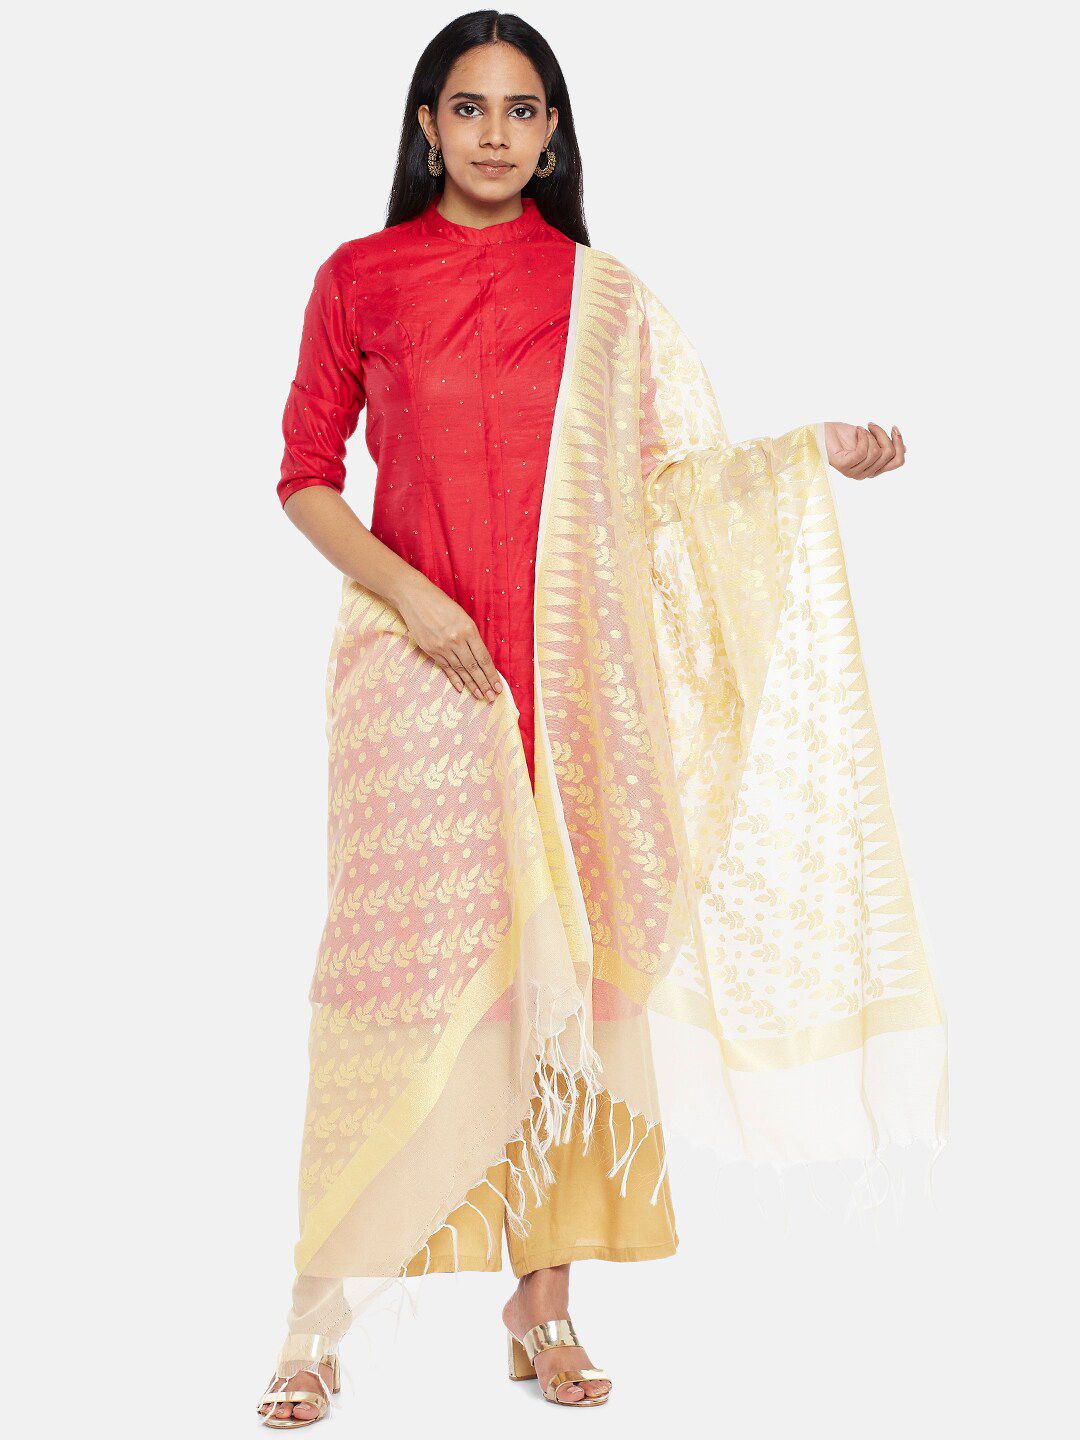 RANGMANCH BY PANTALOONS Gold-Toned & White Woven Design Dupatta Price in India